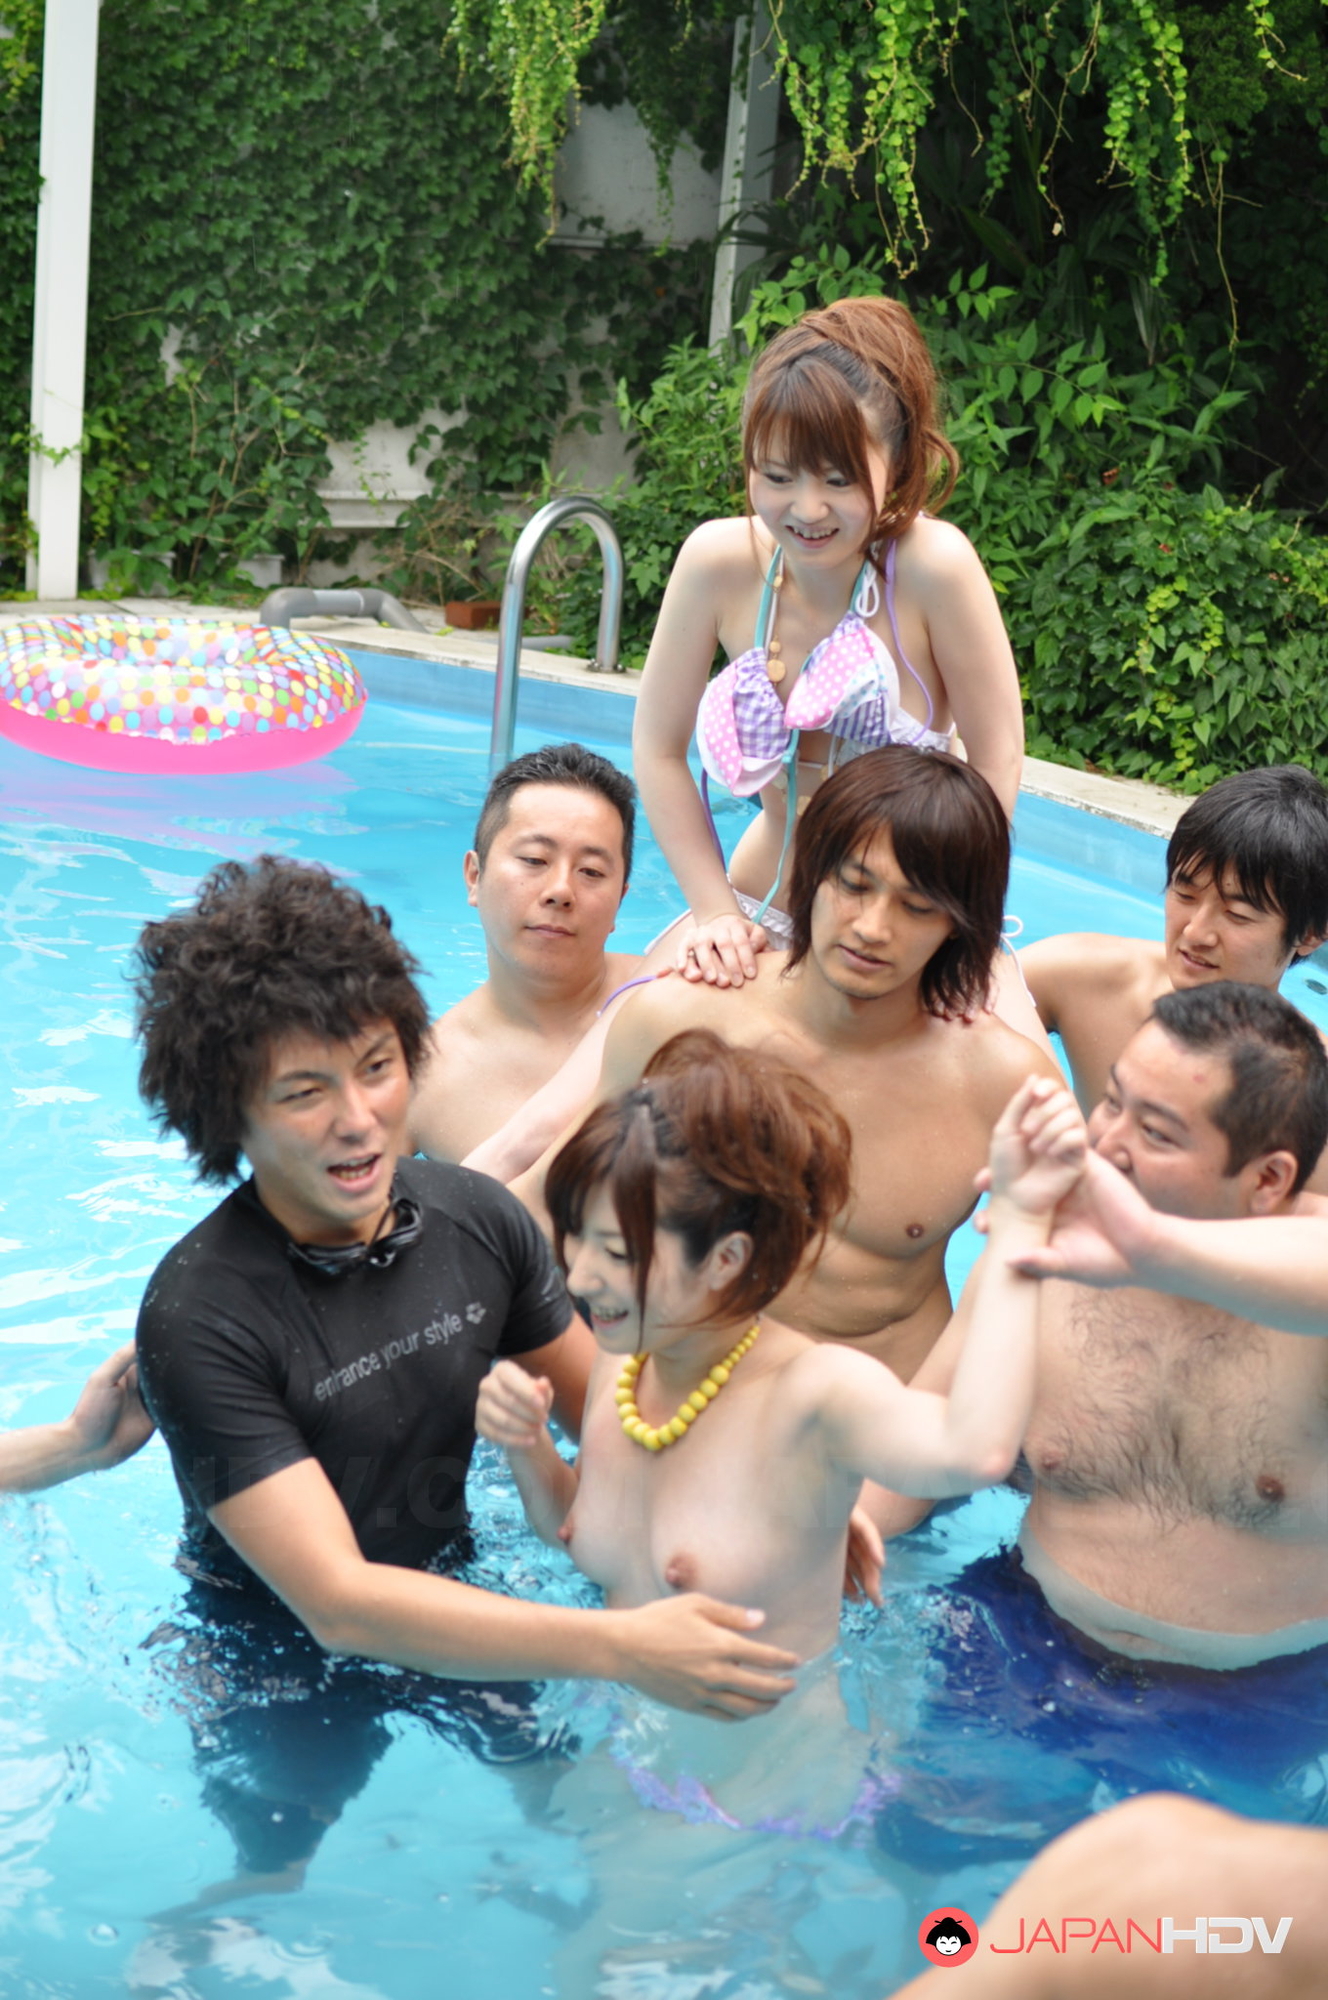 Japanese Pool Porn - Really sexy Japanese pool party